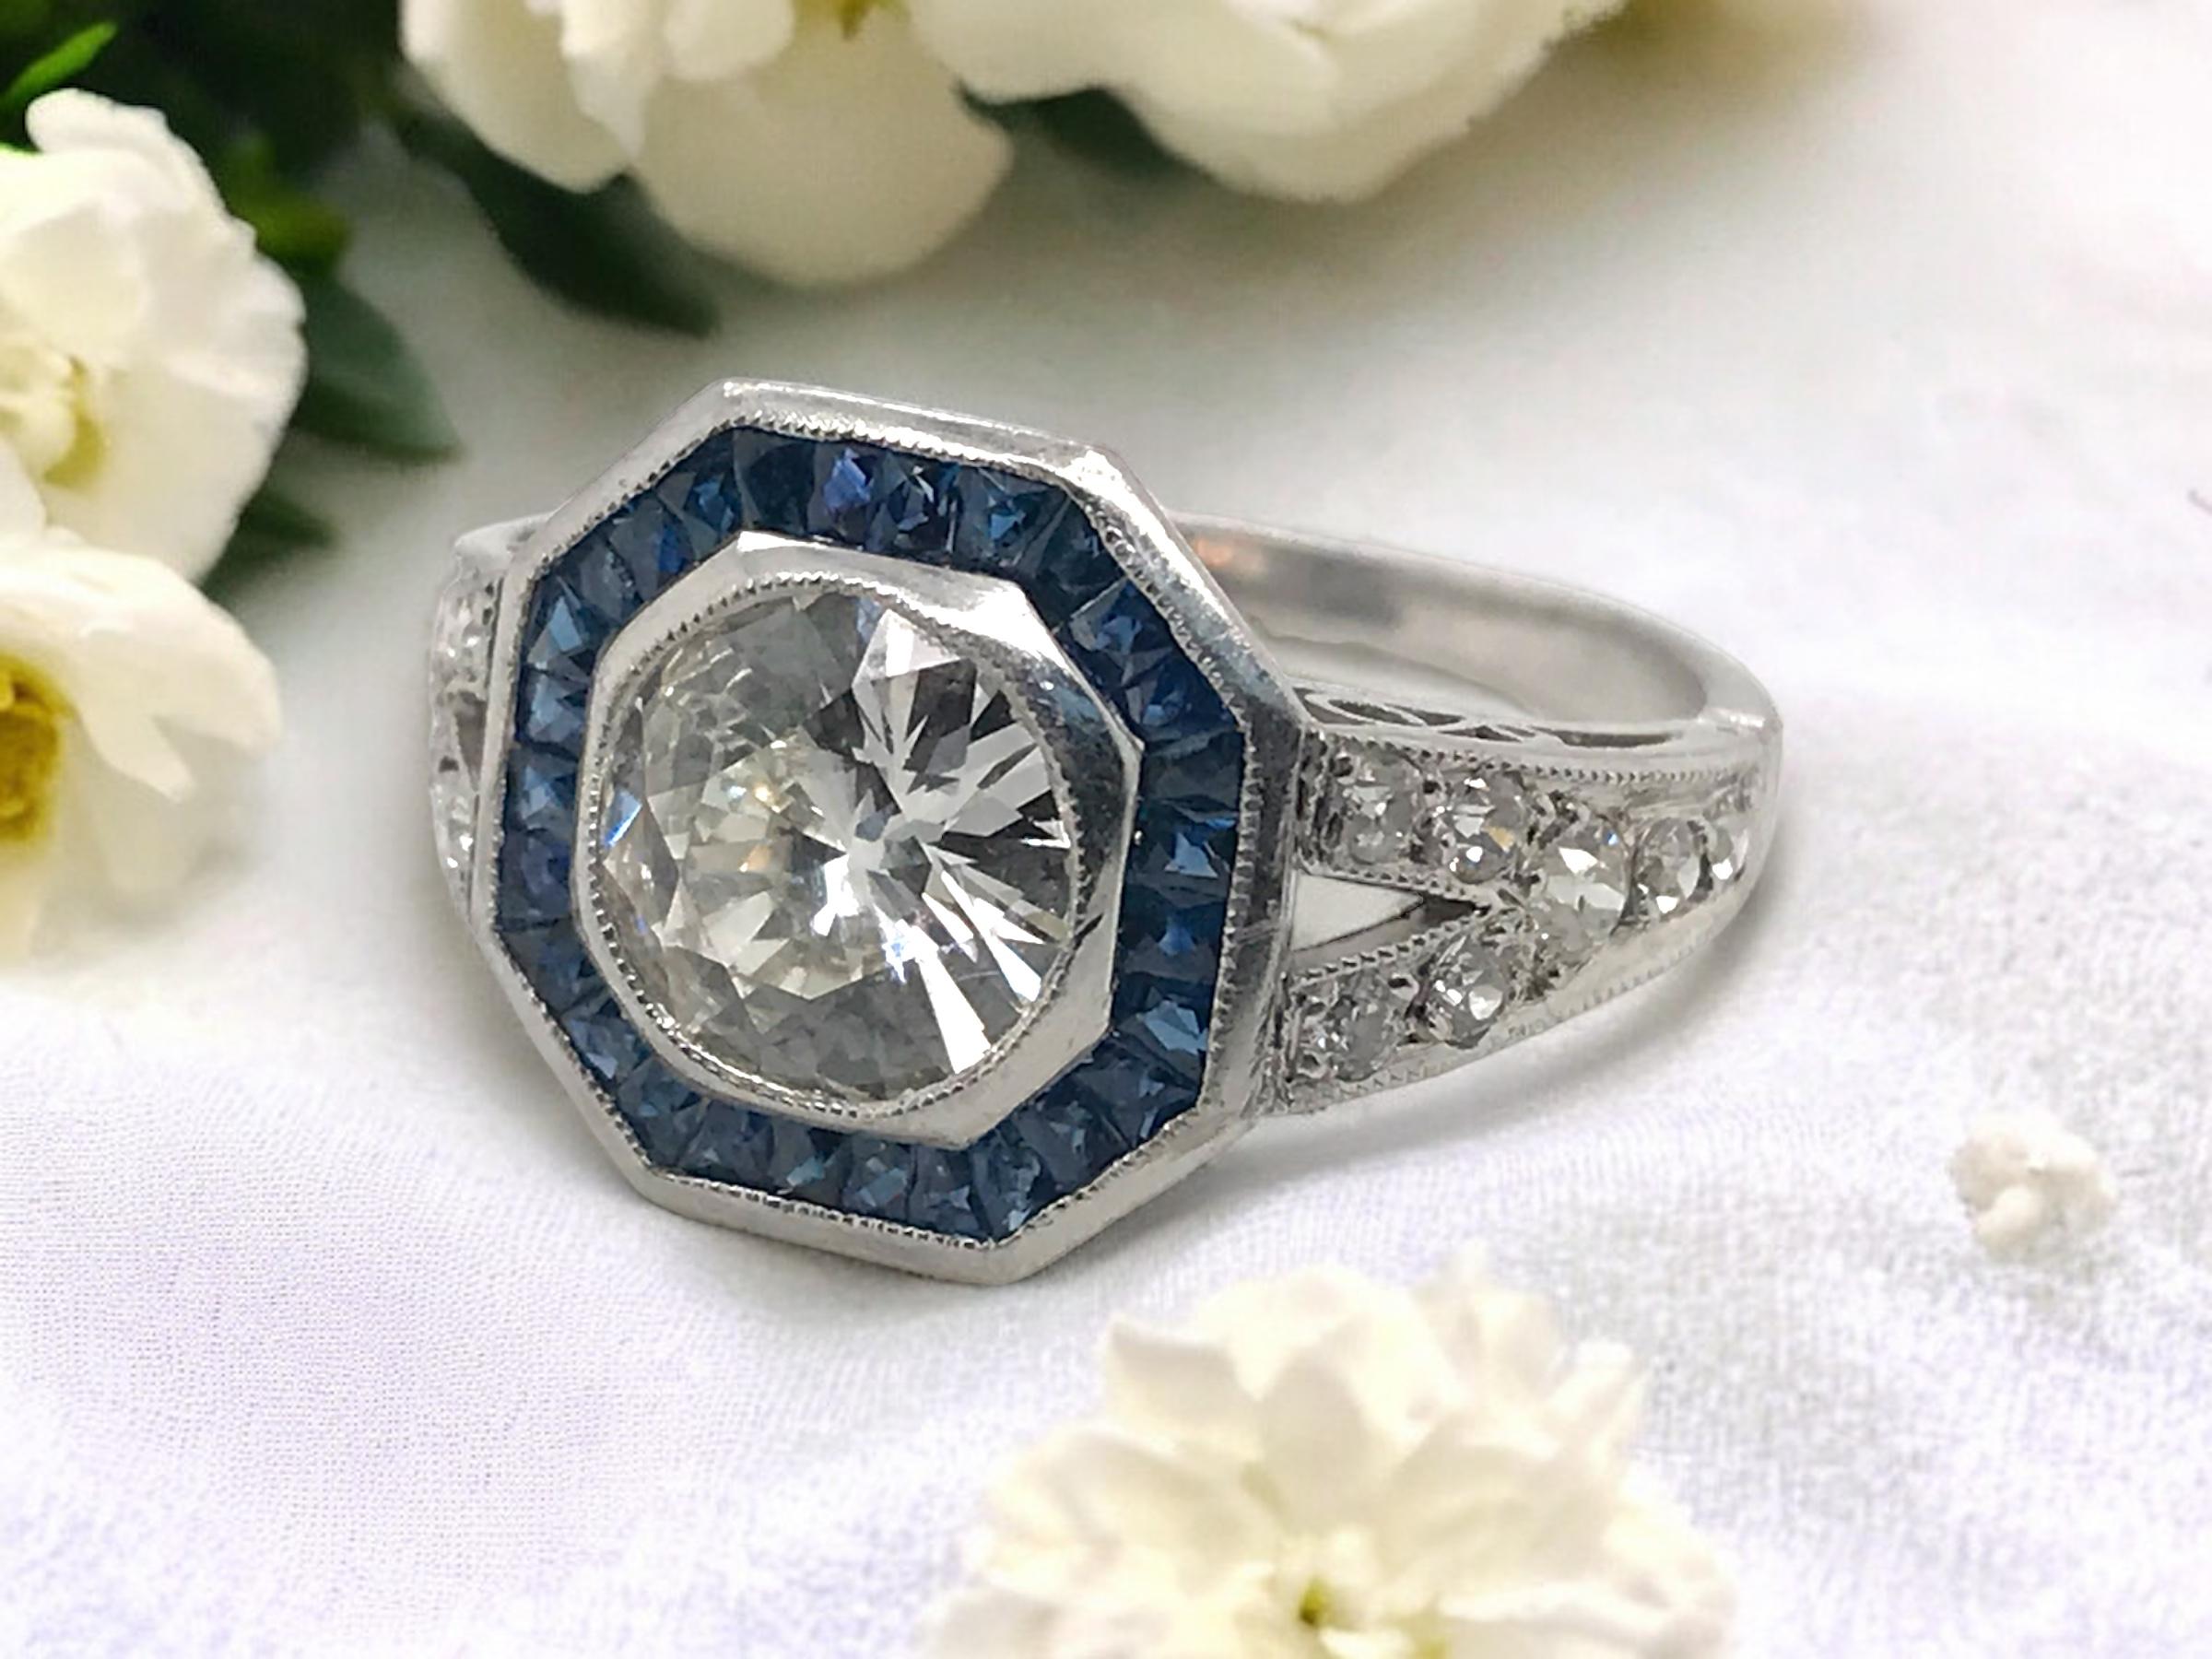 We always love diamonds accented by sapphires.
This beauty is absolutely stunning!!!

Ring Details
Material: Platinum
Weight: 3.9 Grams
Head Width: 12.3mm
Height: 5.6mm
Finger Size: 6 1/2
Sizable Upon Request

Accented by the following stones
1 -